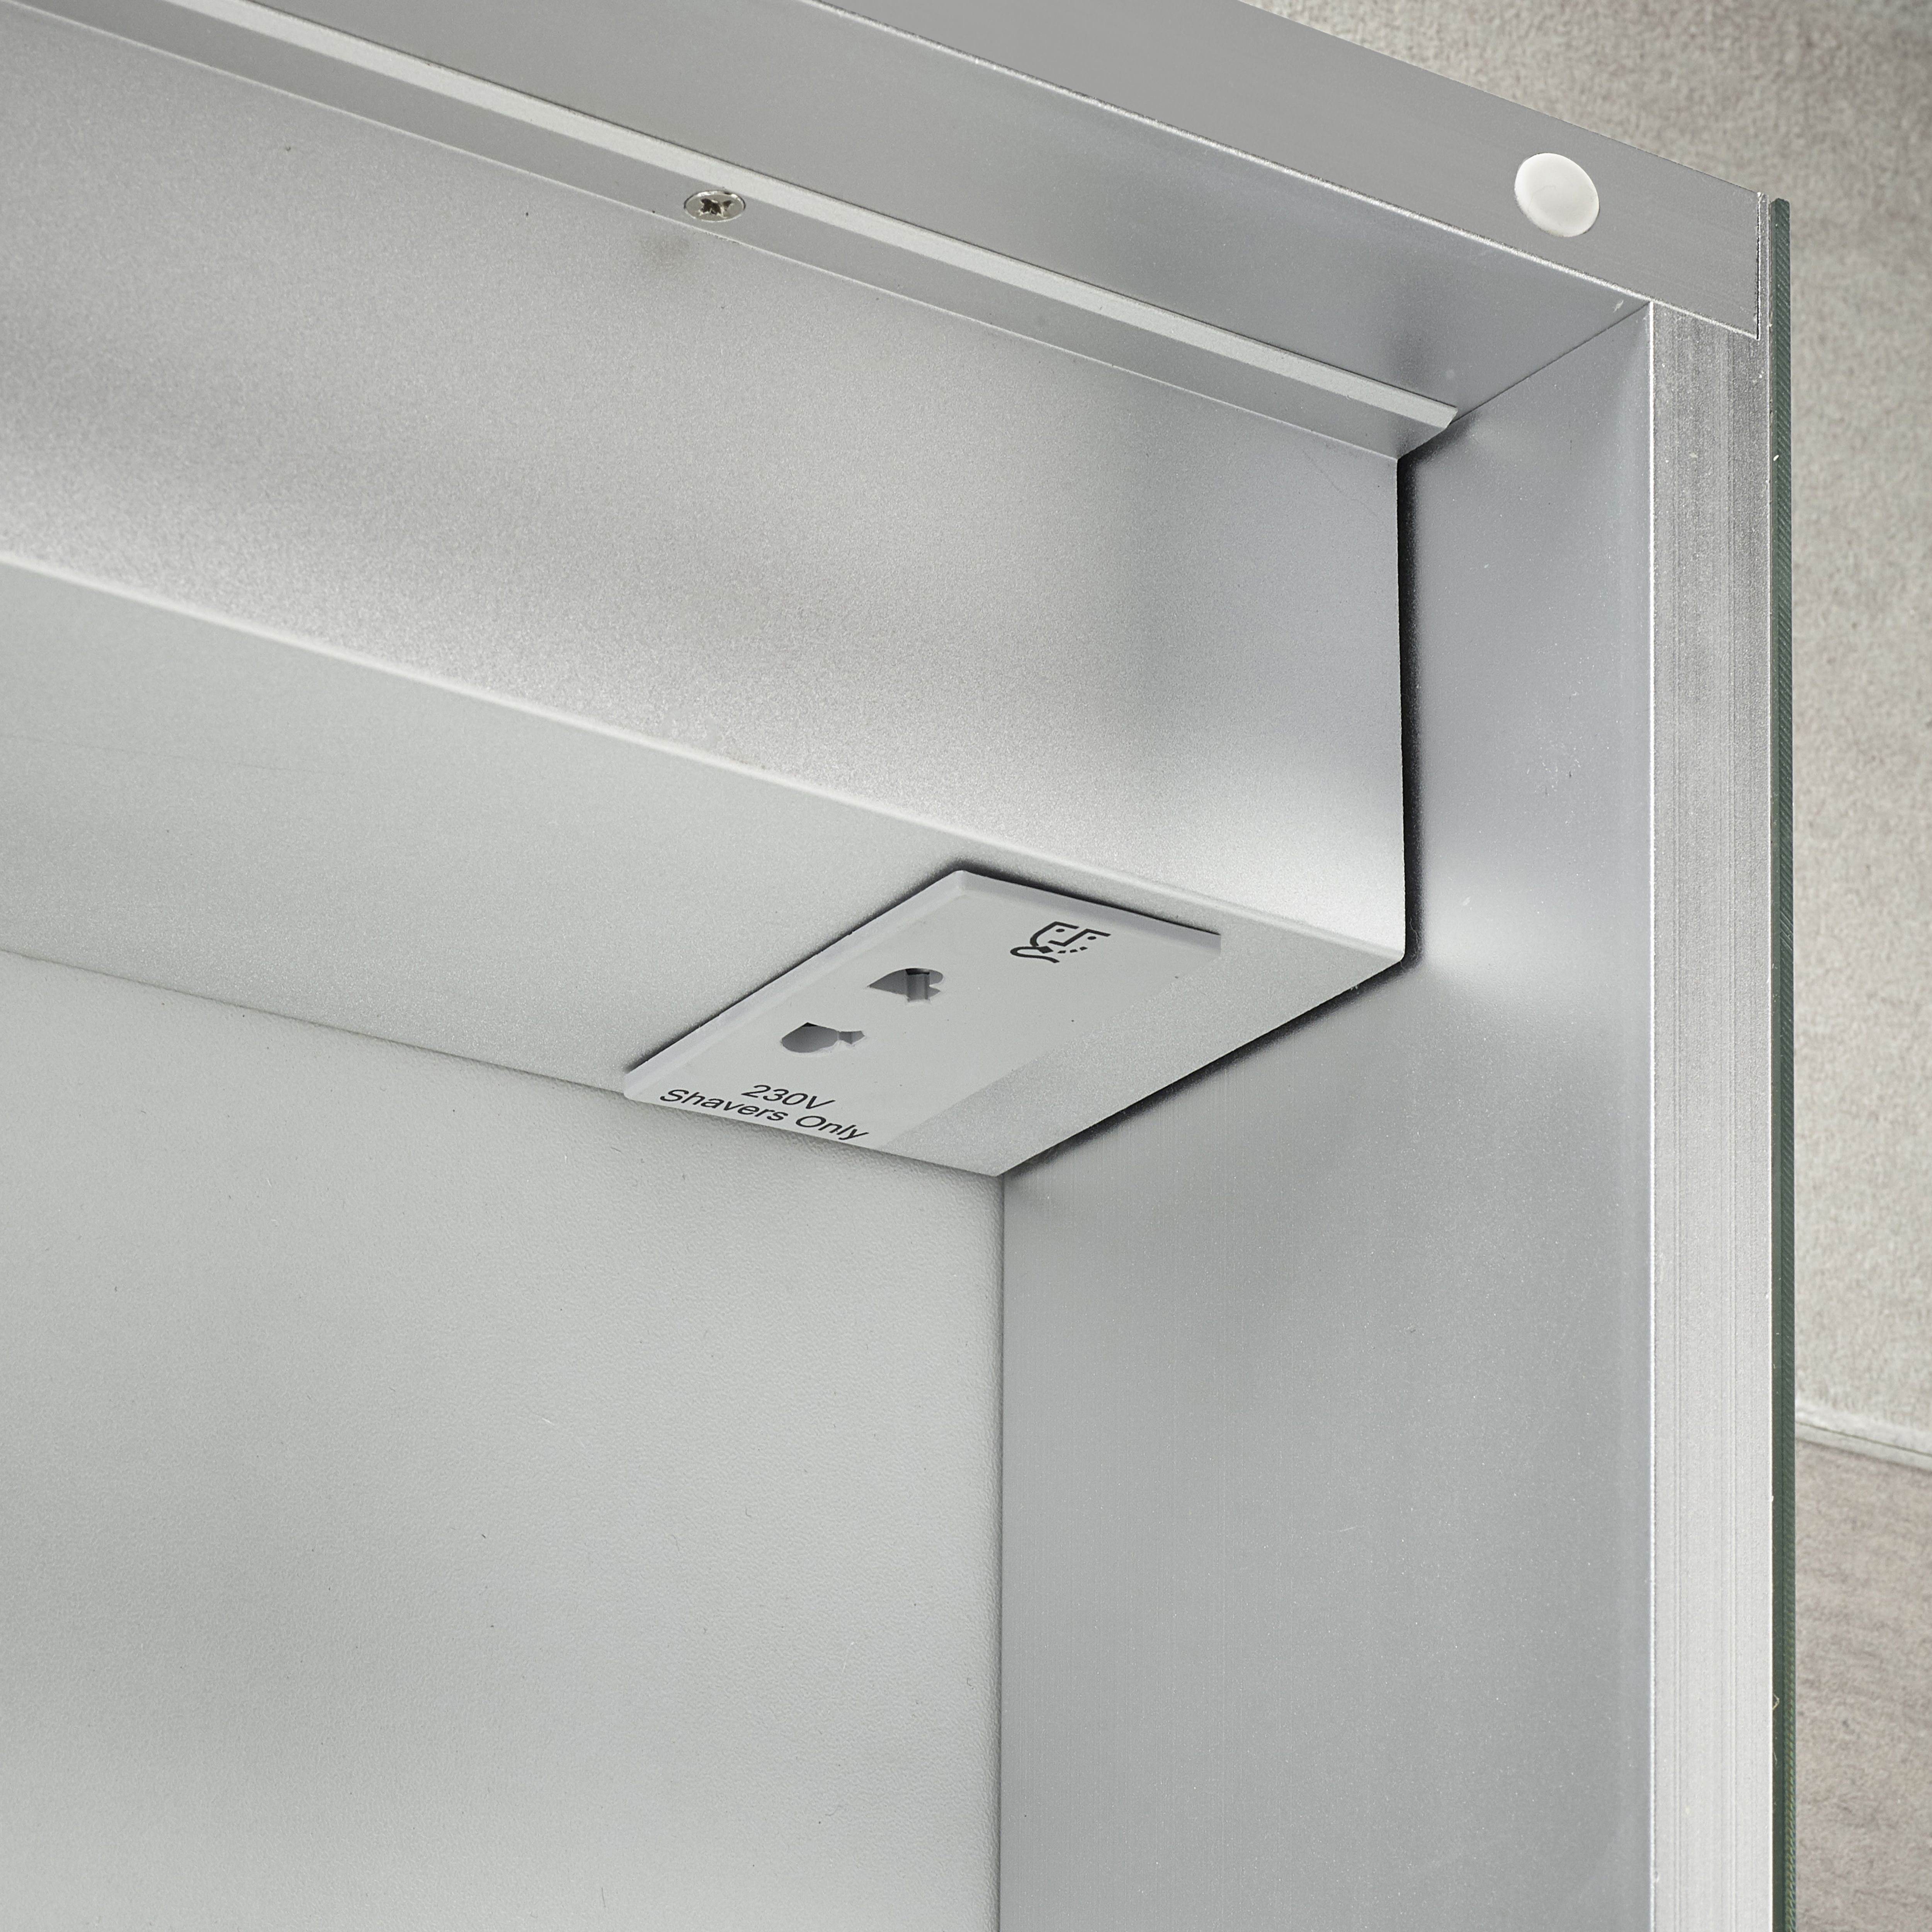 Sensio Harlow Wall-mounted Illuminated Mirrored Bathroom Cabinet with shaver socket (W)600mm (H)700mm